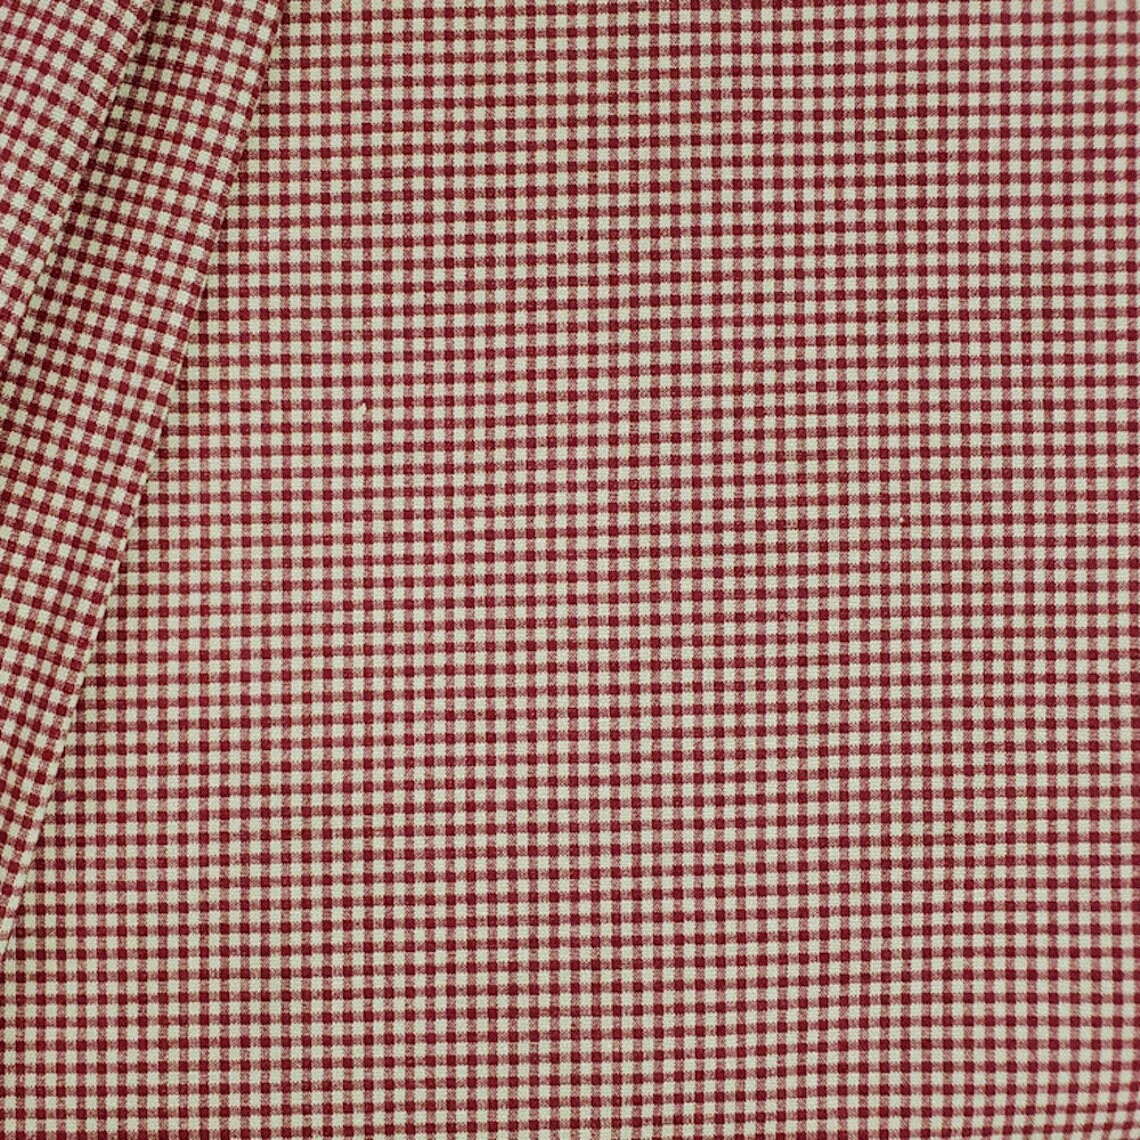 tailored bedskirt in farmhouse red gingham check on beige